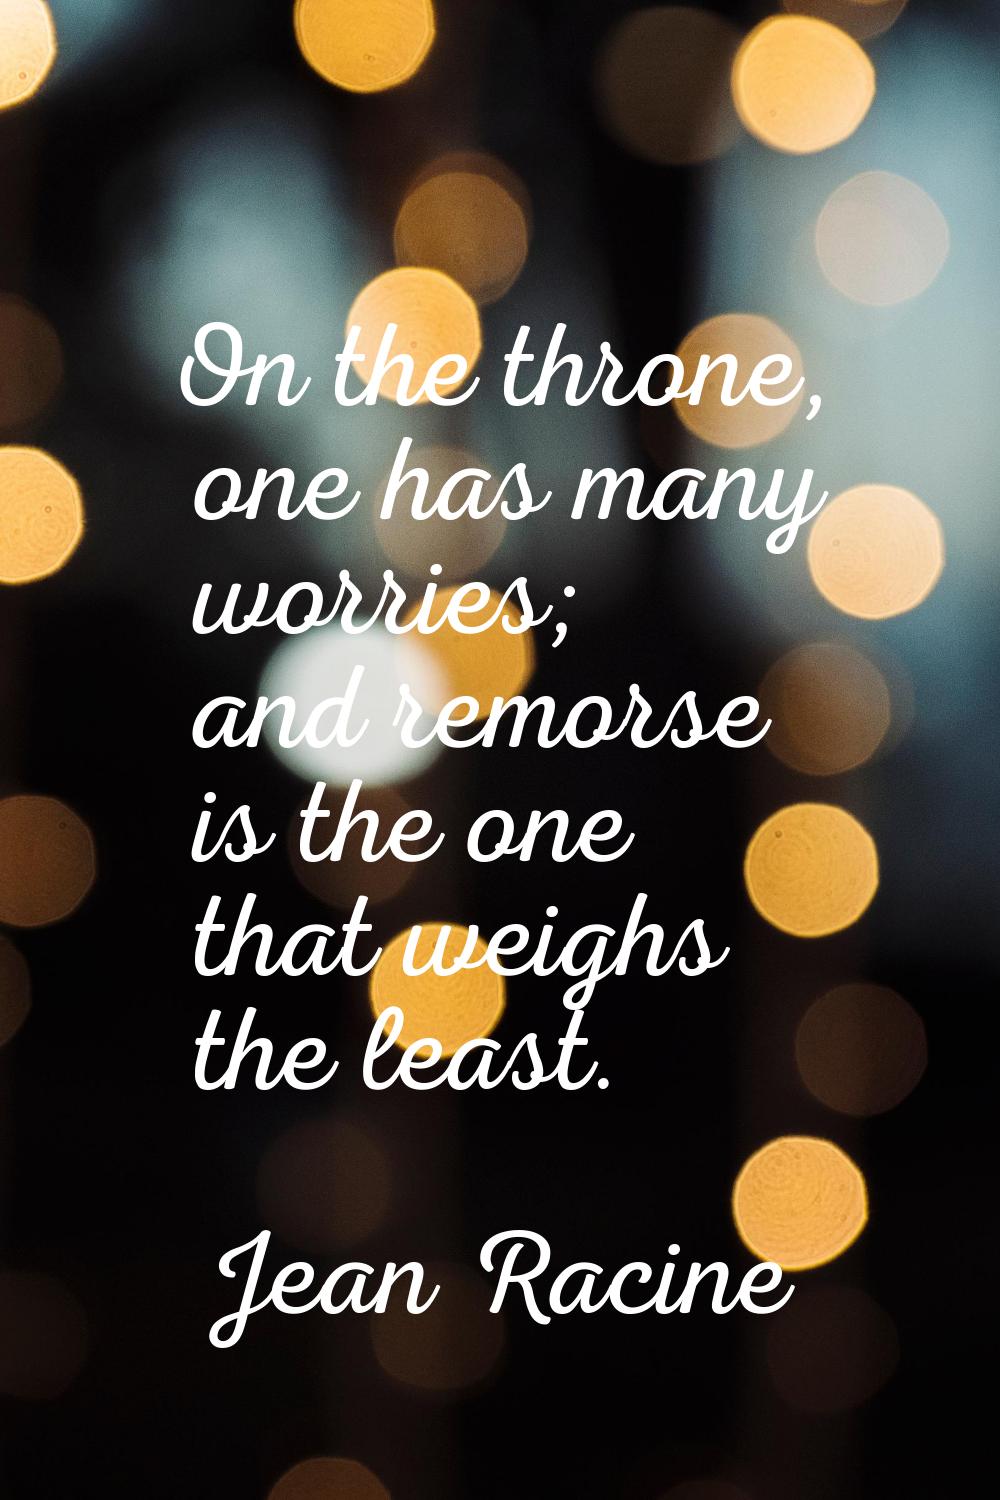 On the throne, one has many worries; and remorse is the one that weighs the least.